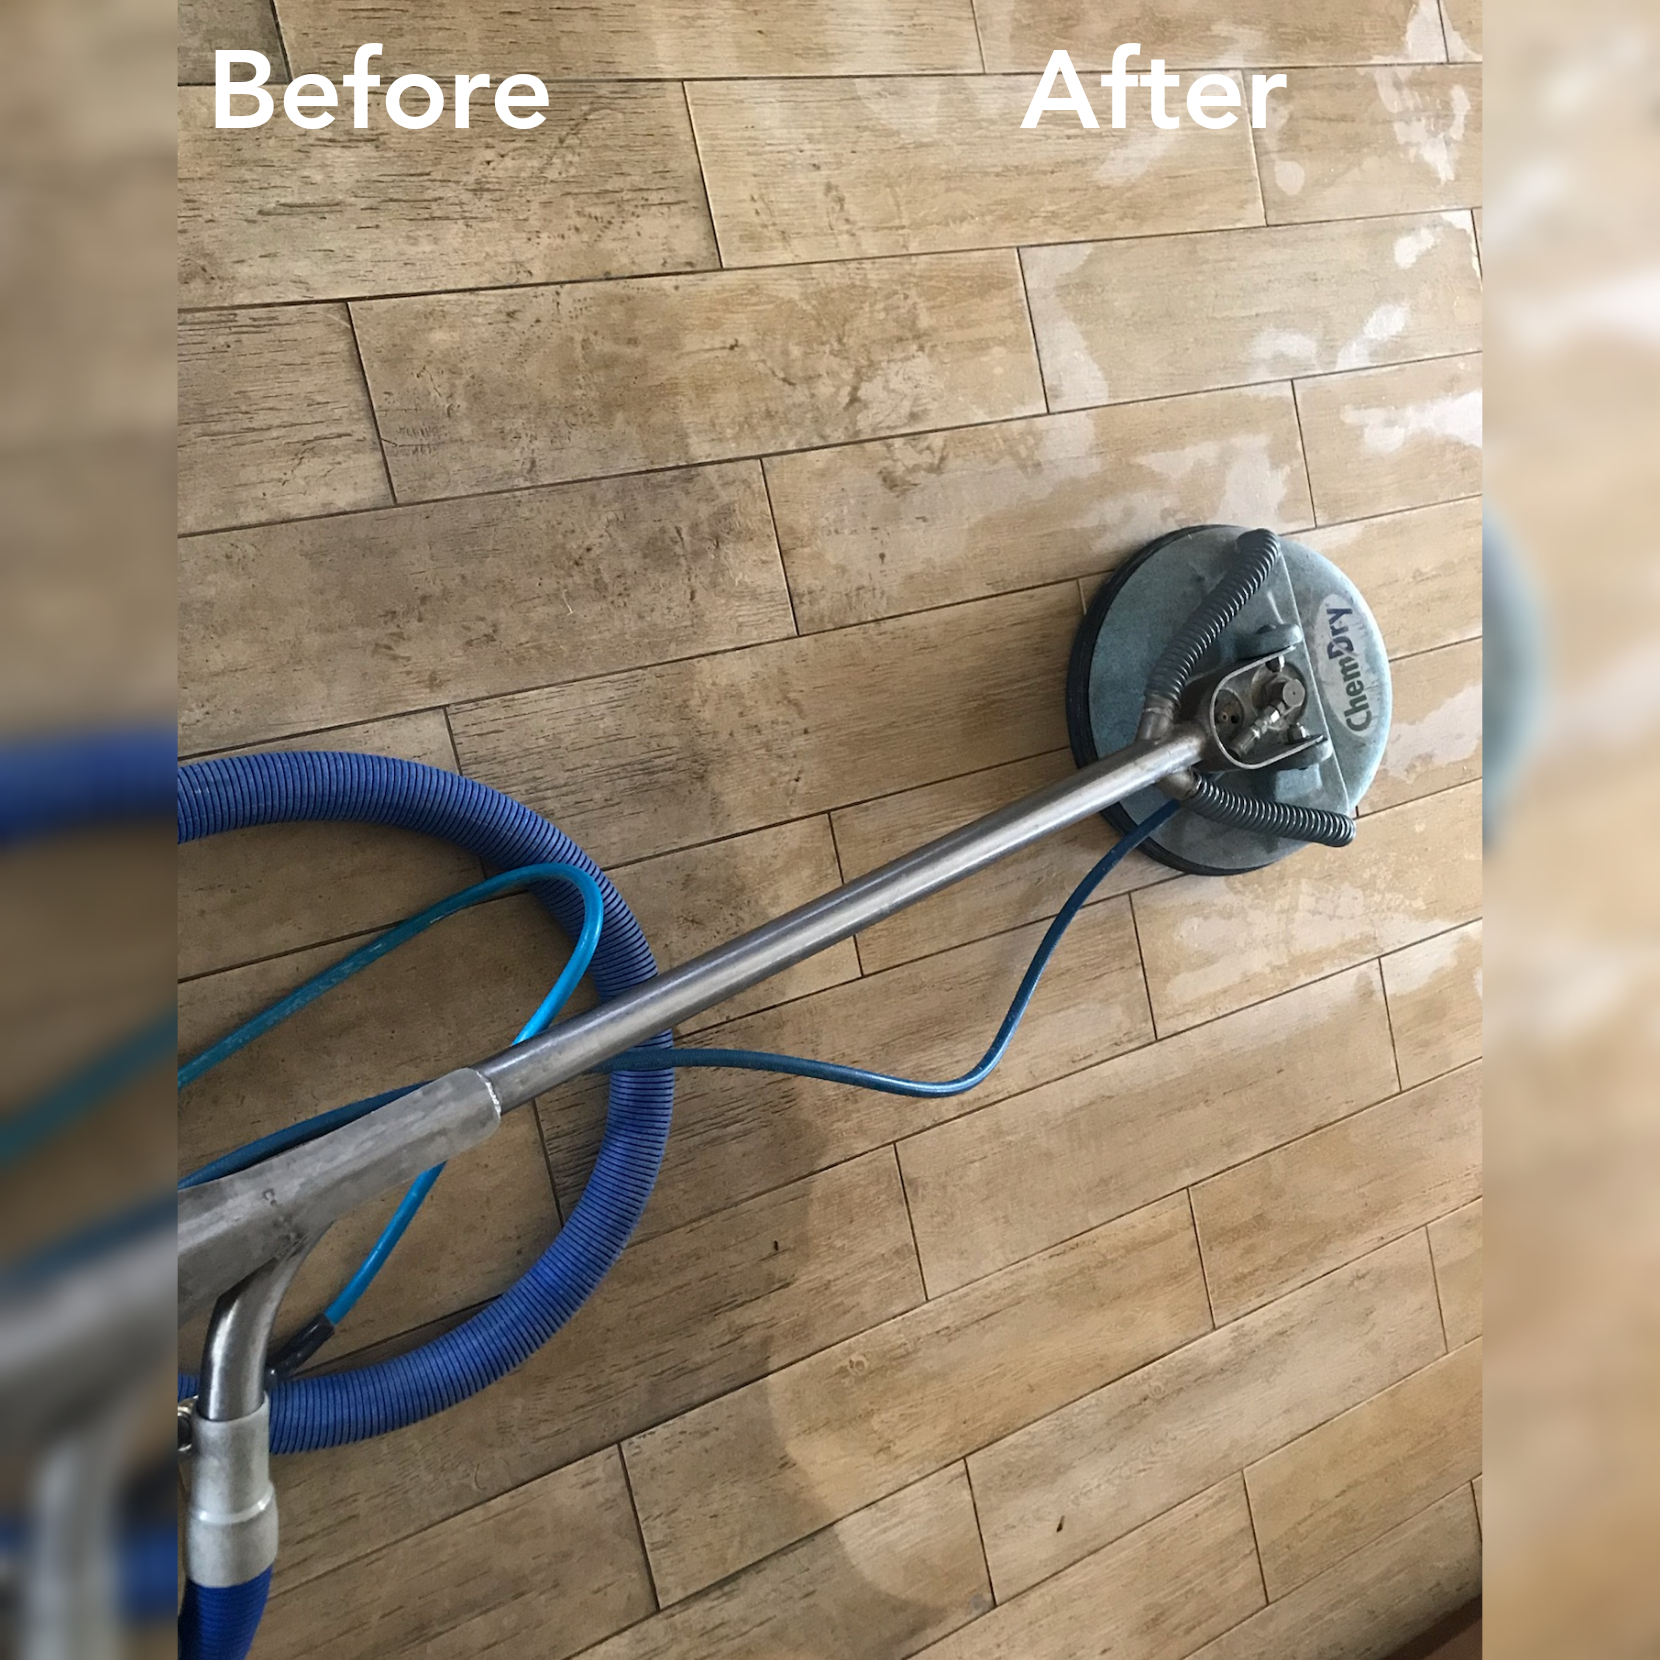 Stone, Tile and Grout Cleaning Provided by Chem-Dry